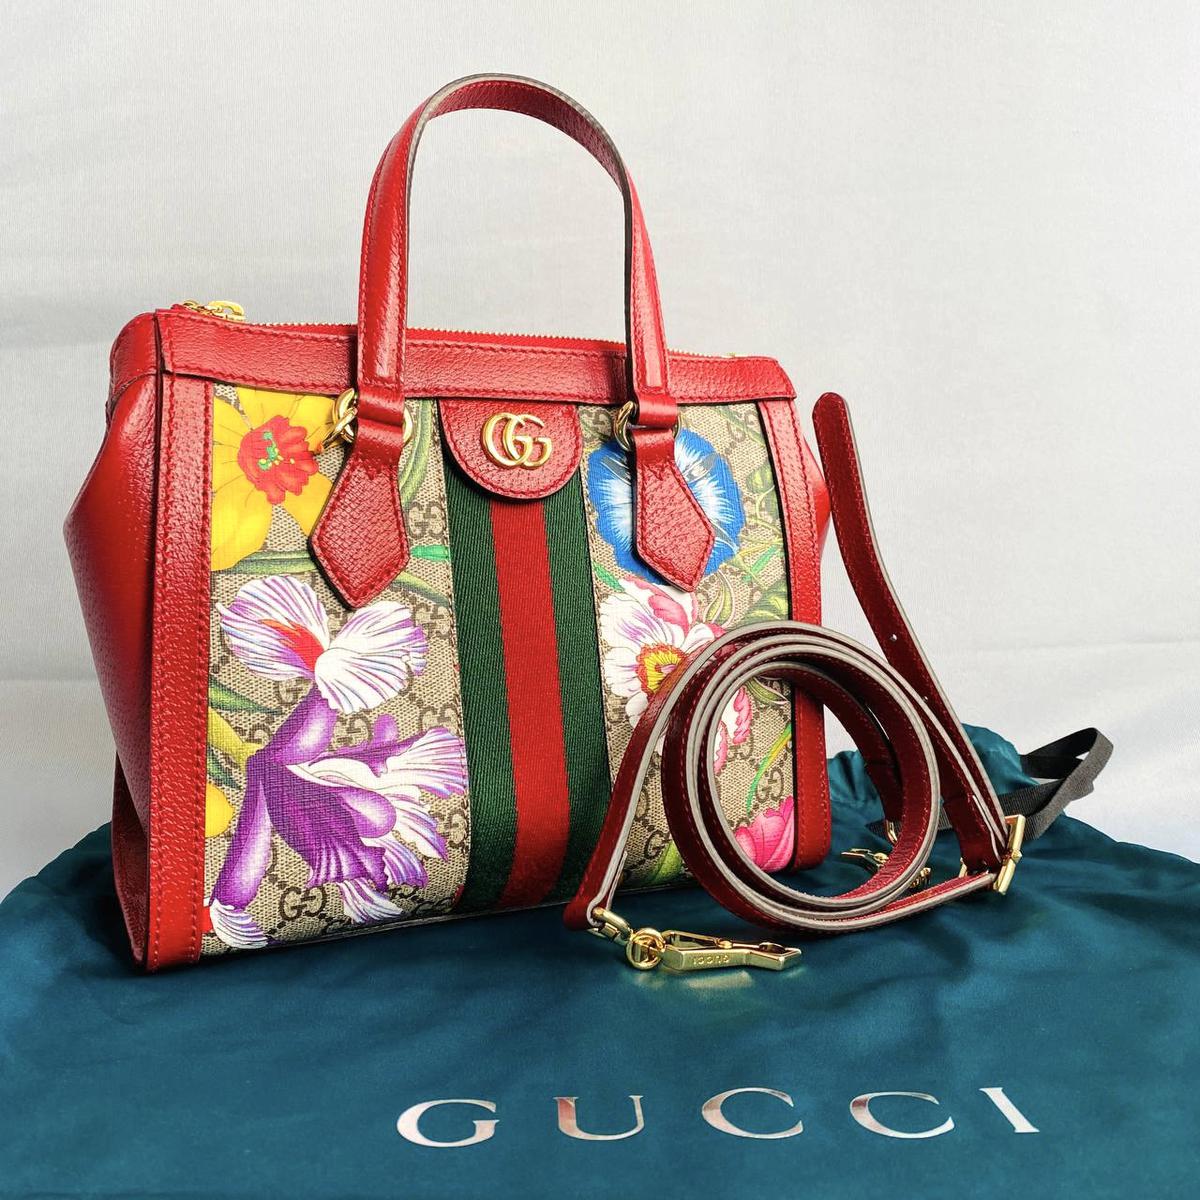 GUCCI Ophidia Top Handle Tote at Relove Closet